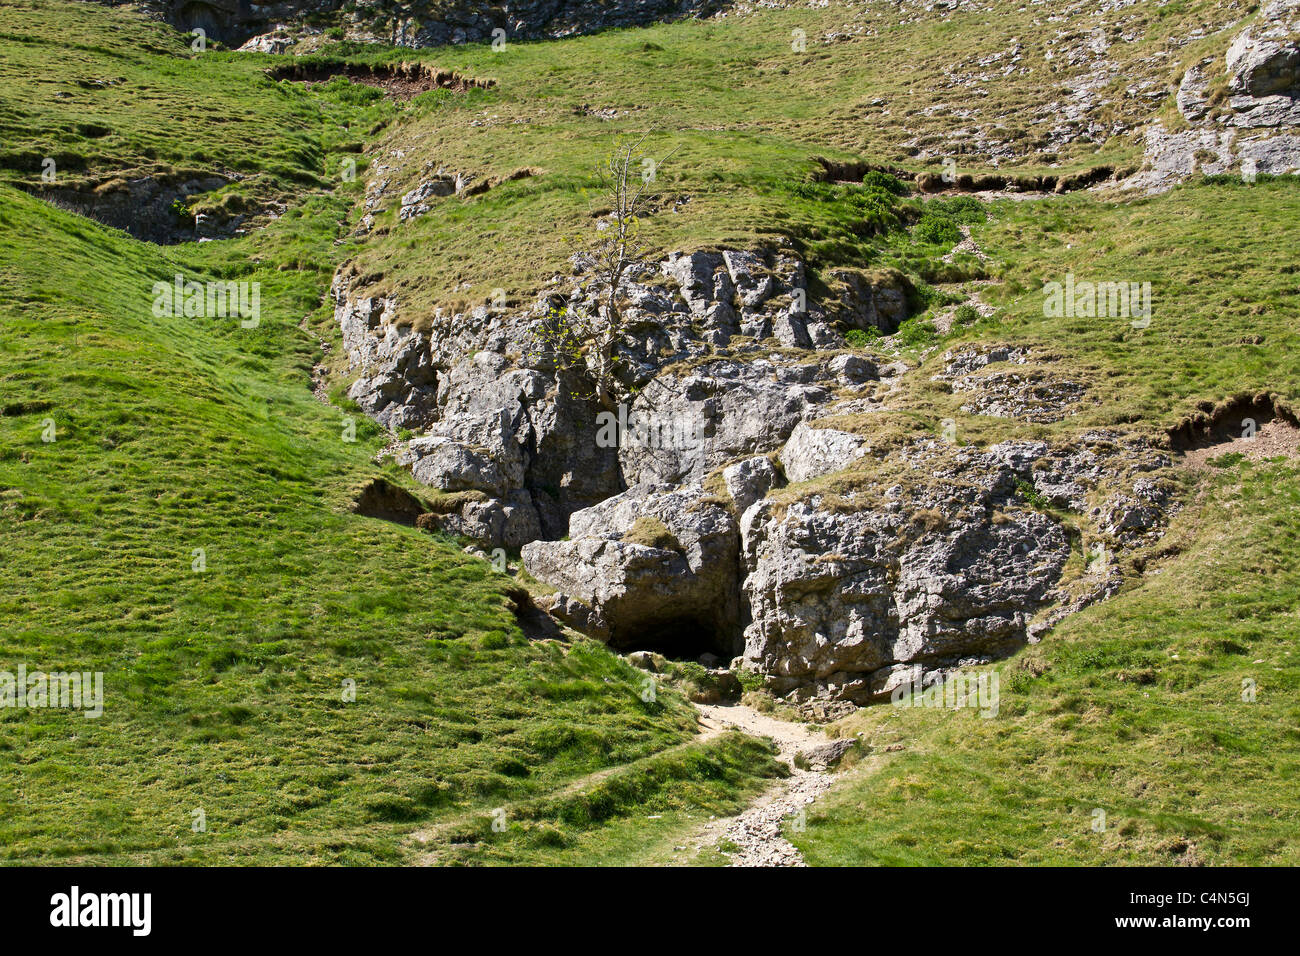 A tempting hole in a limestone outcrop at CaveDale Stock Photo